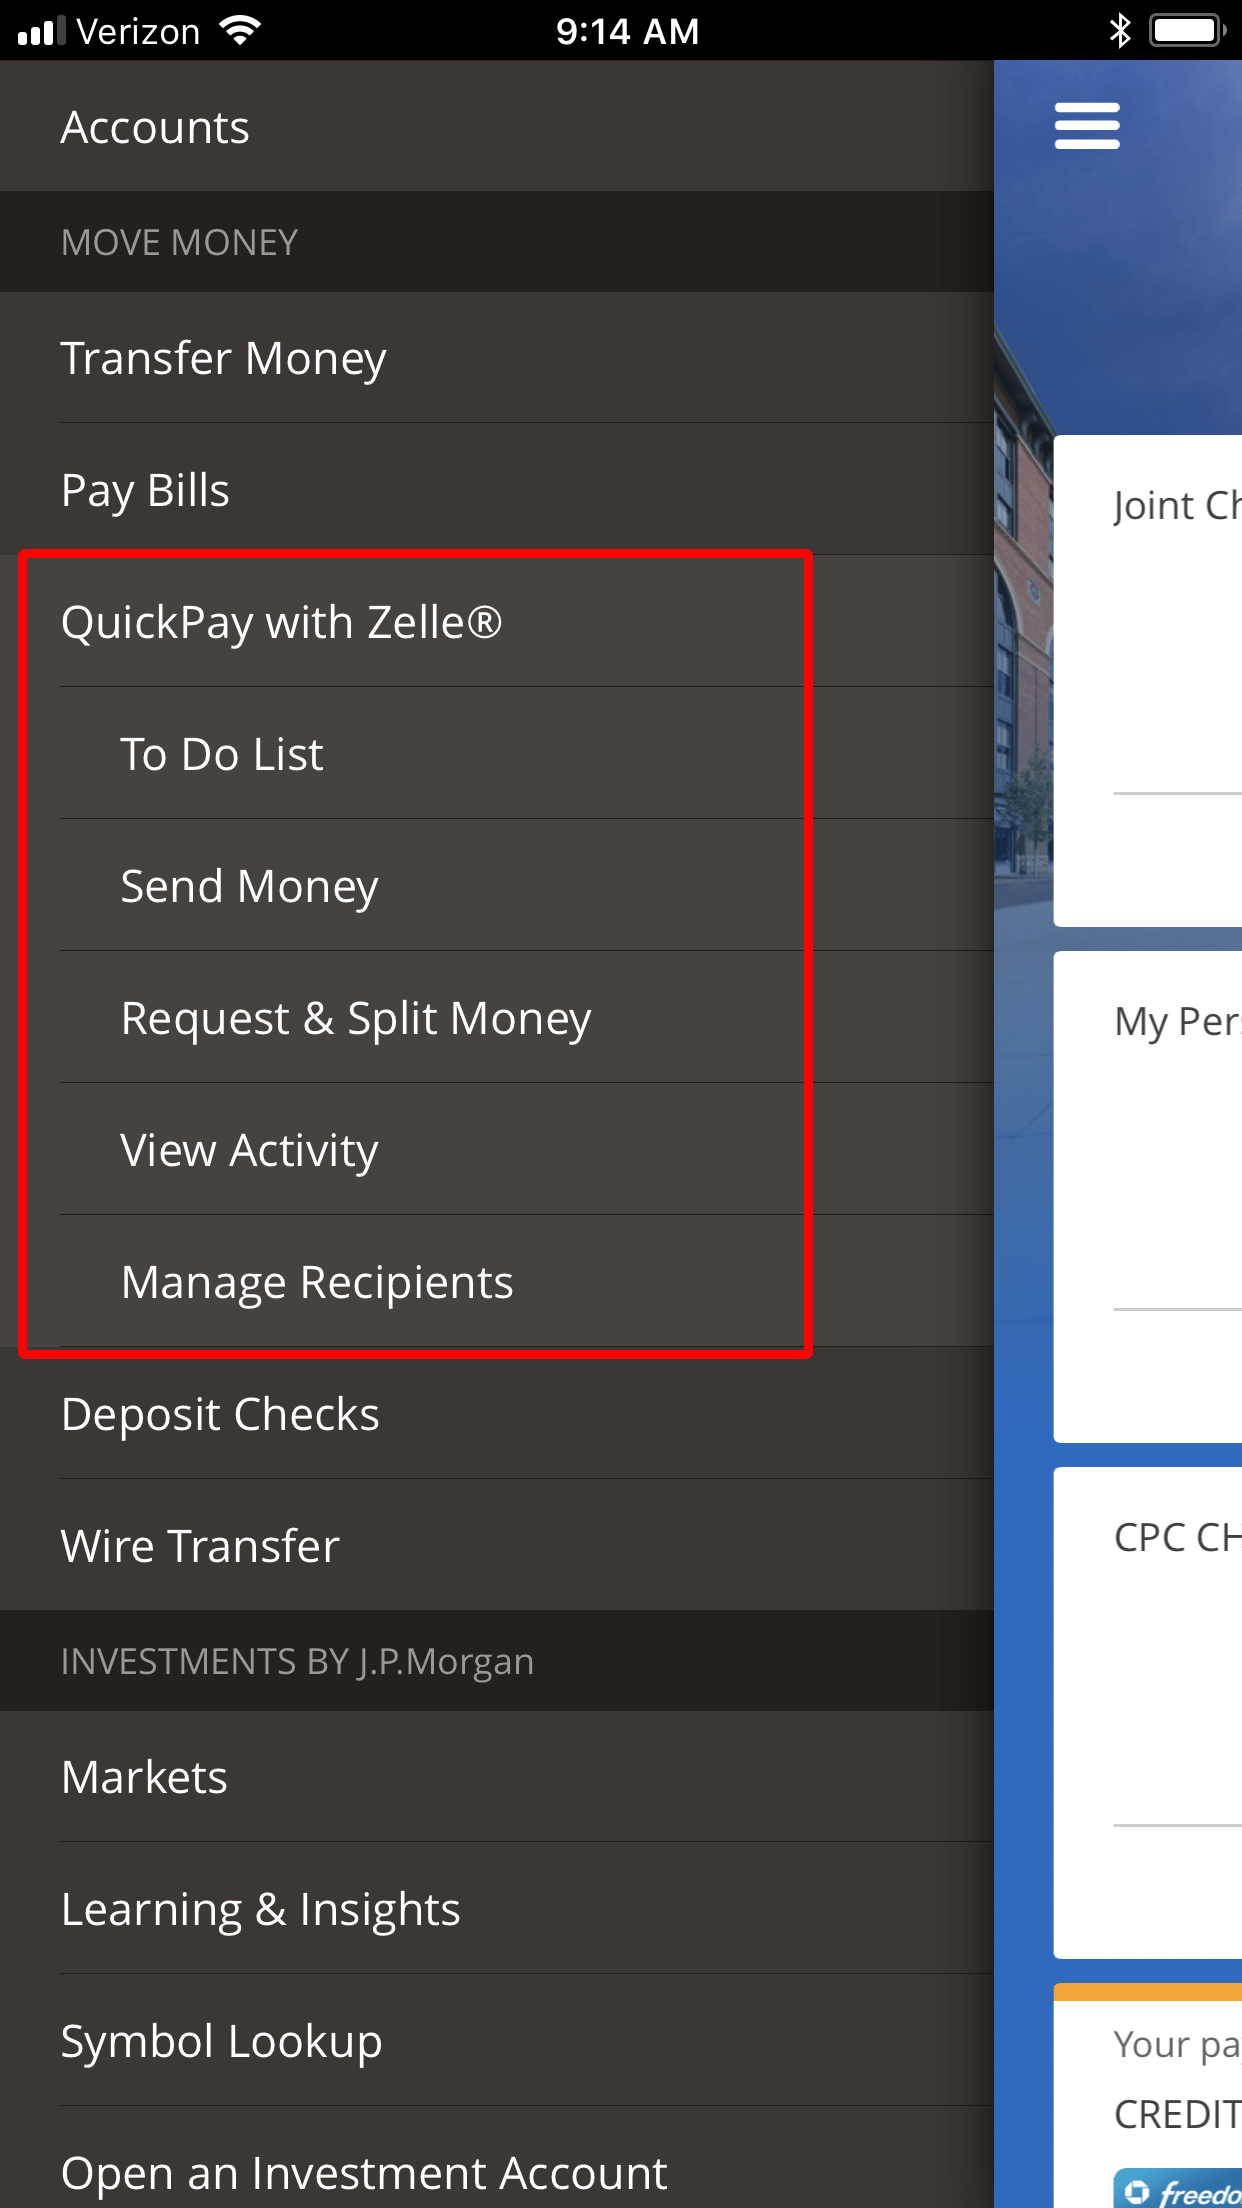 chase quickpay with zelle limit